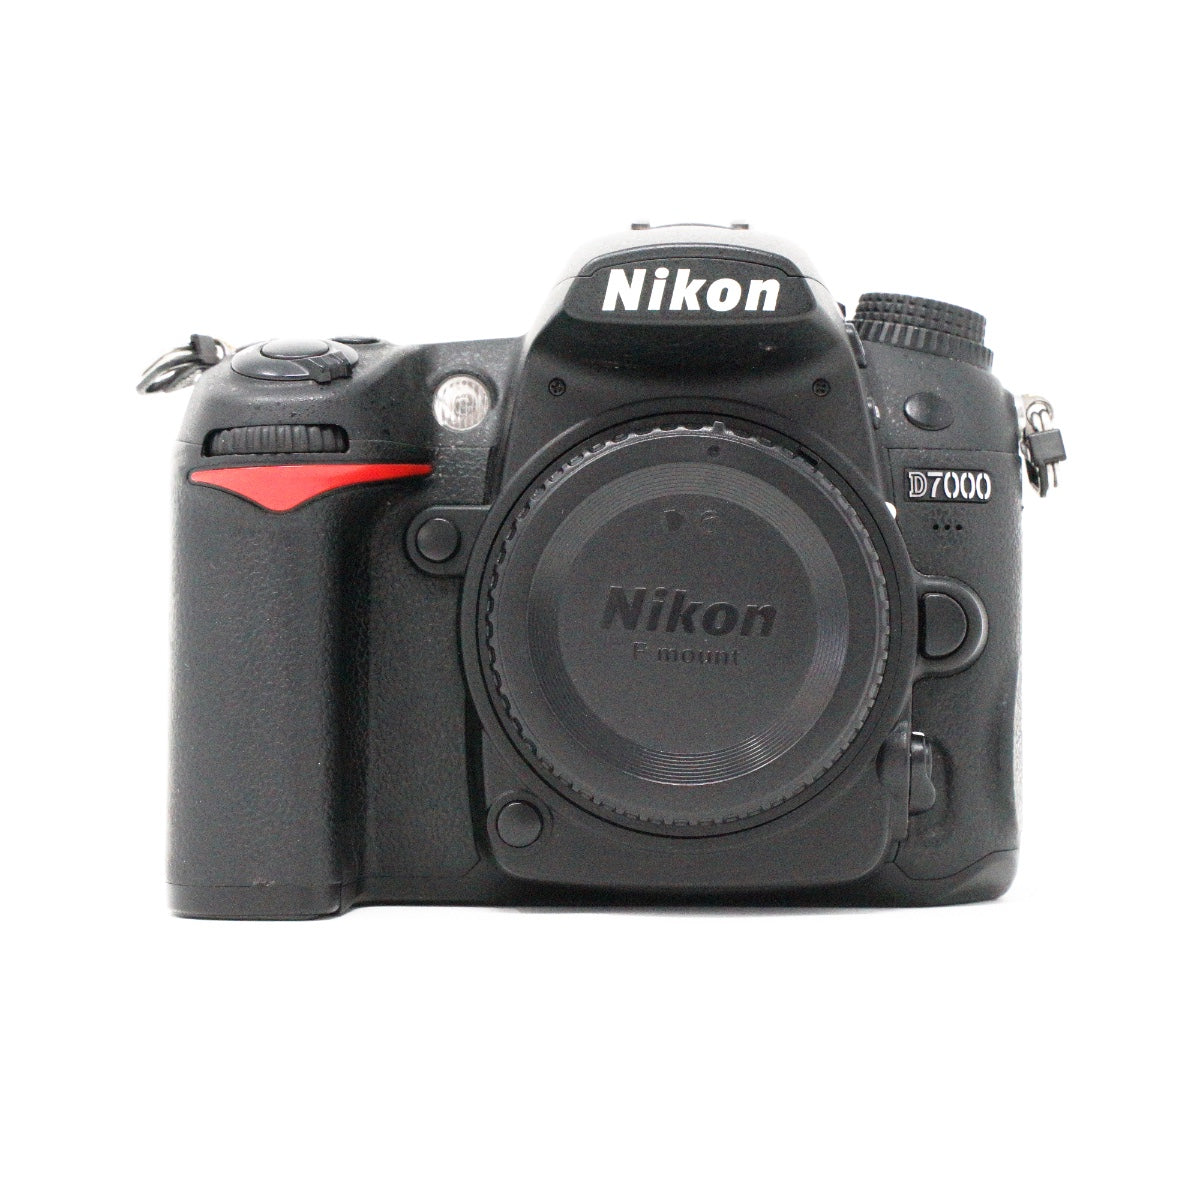 USED Nikon D7000 Camera Body Only - Battery, Charger, Strap